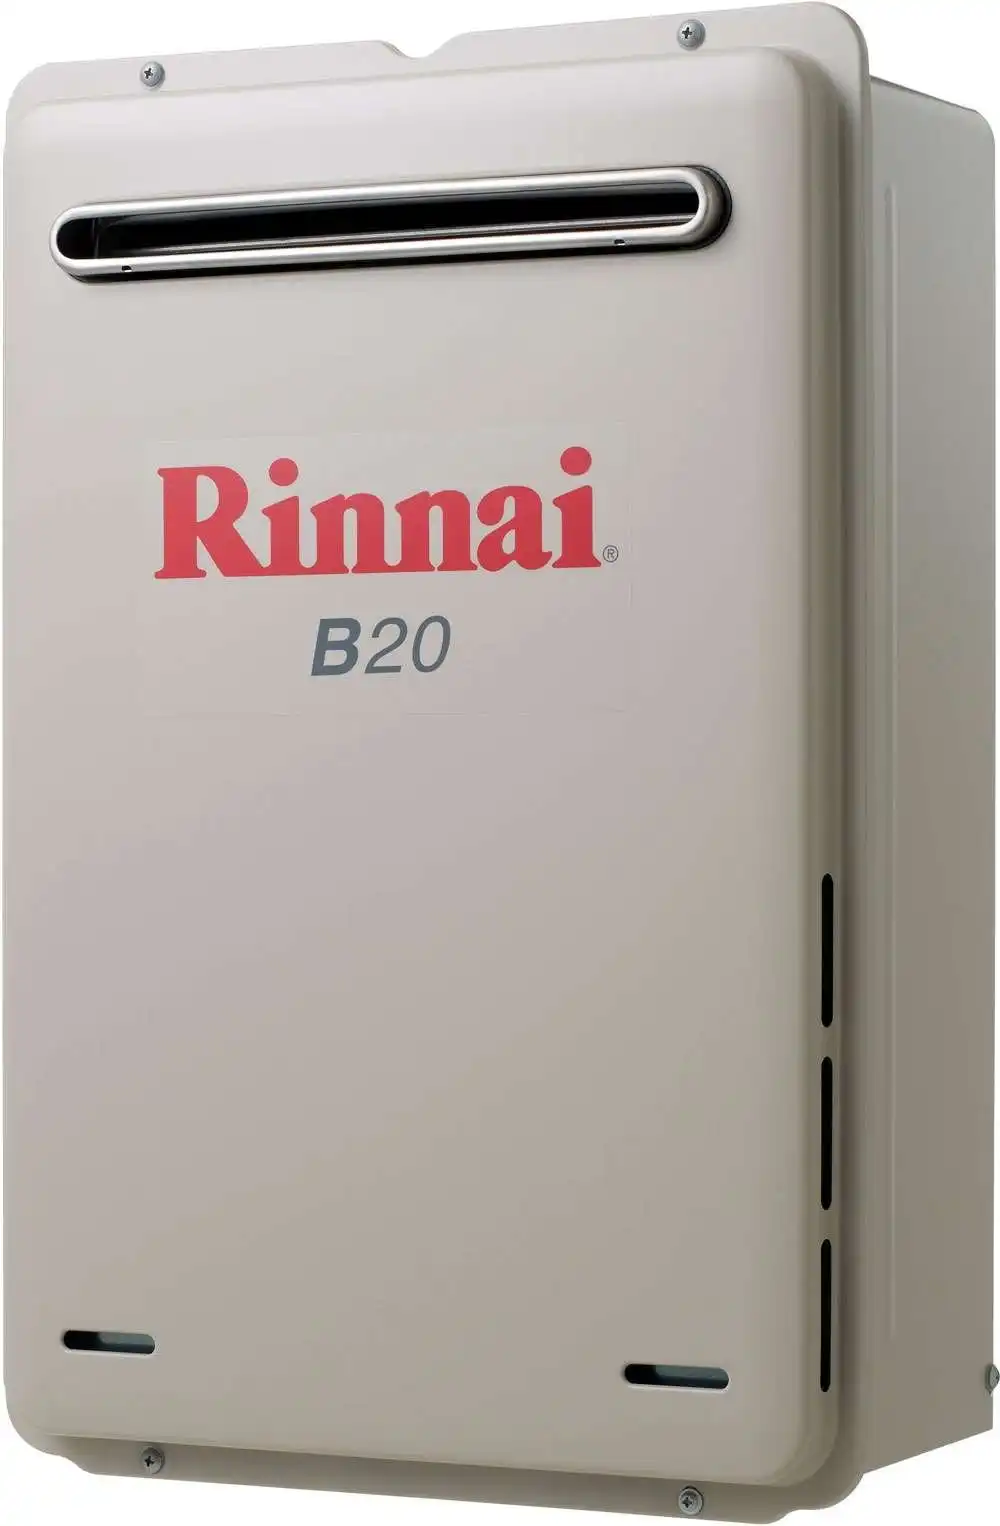 Rinnai Builders 60oC 20L Instant Hot Water System B20N60A B20 *NATURAL GAS*